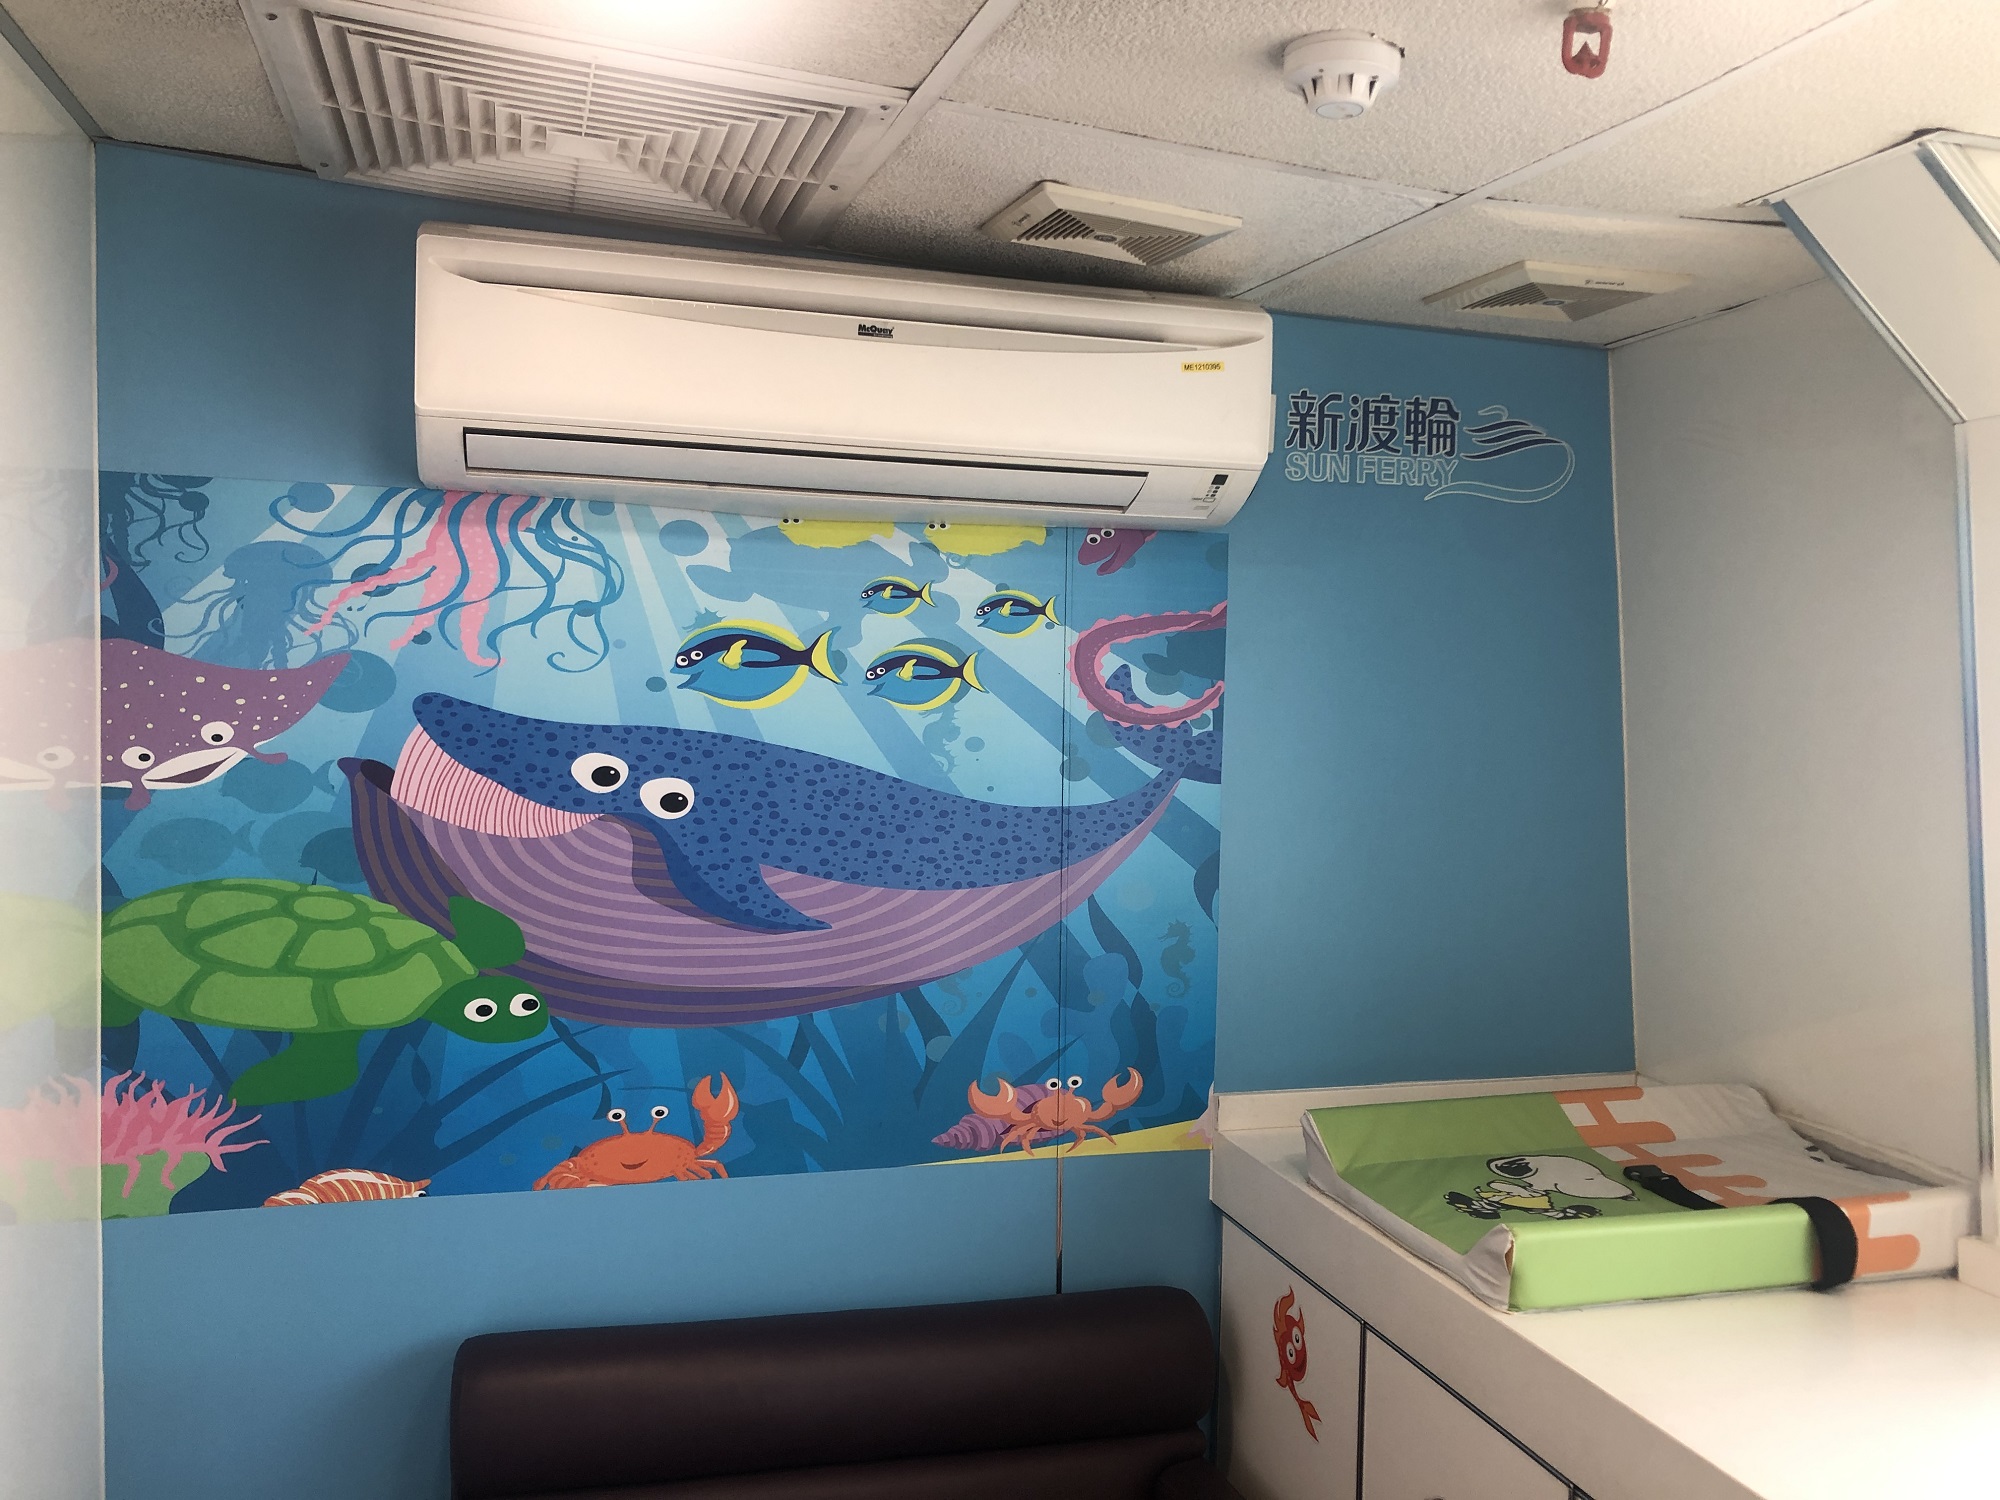 The first-ever onboard breastfeeding room in Hong Kong